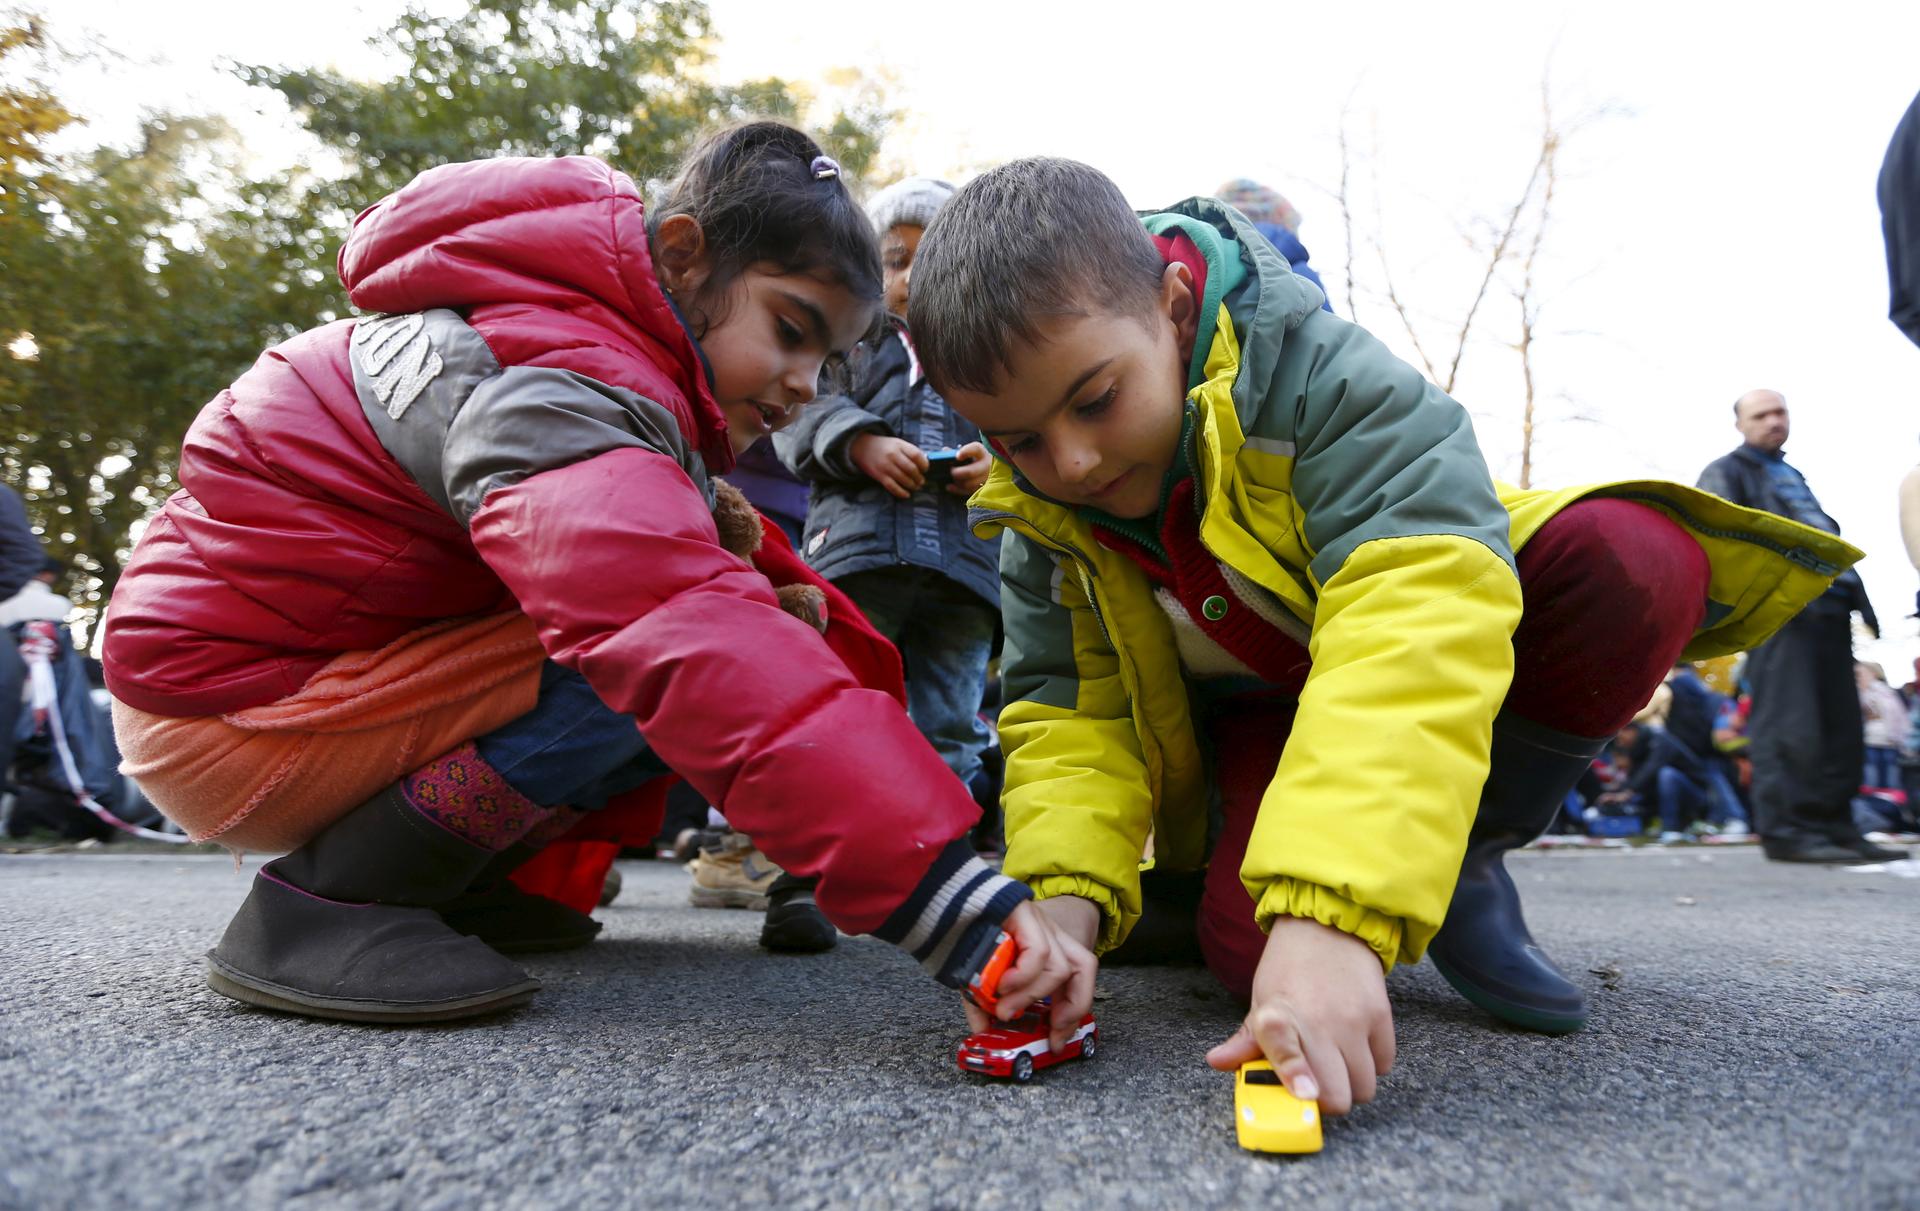 Syrian playmates lay along the street after arriving with their family. Chancellor Angela Merkel was criticized and praised over her management of the refugee crisis. Germany is taking in more migrants than any other EU state.